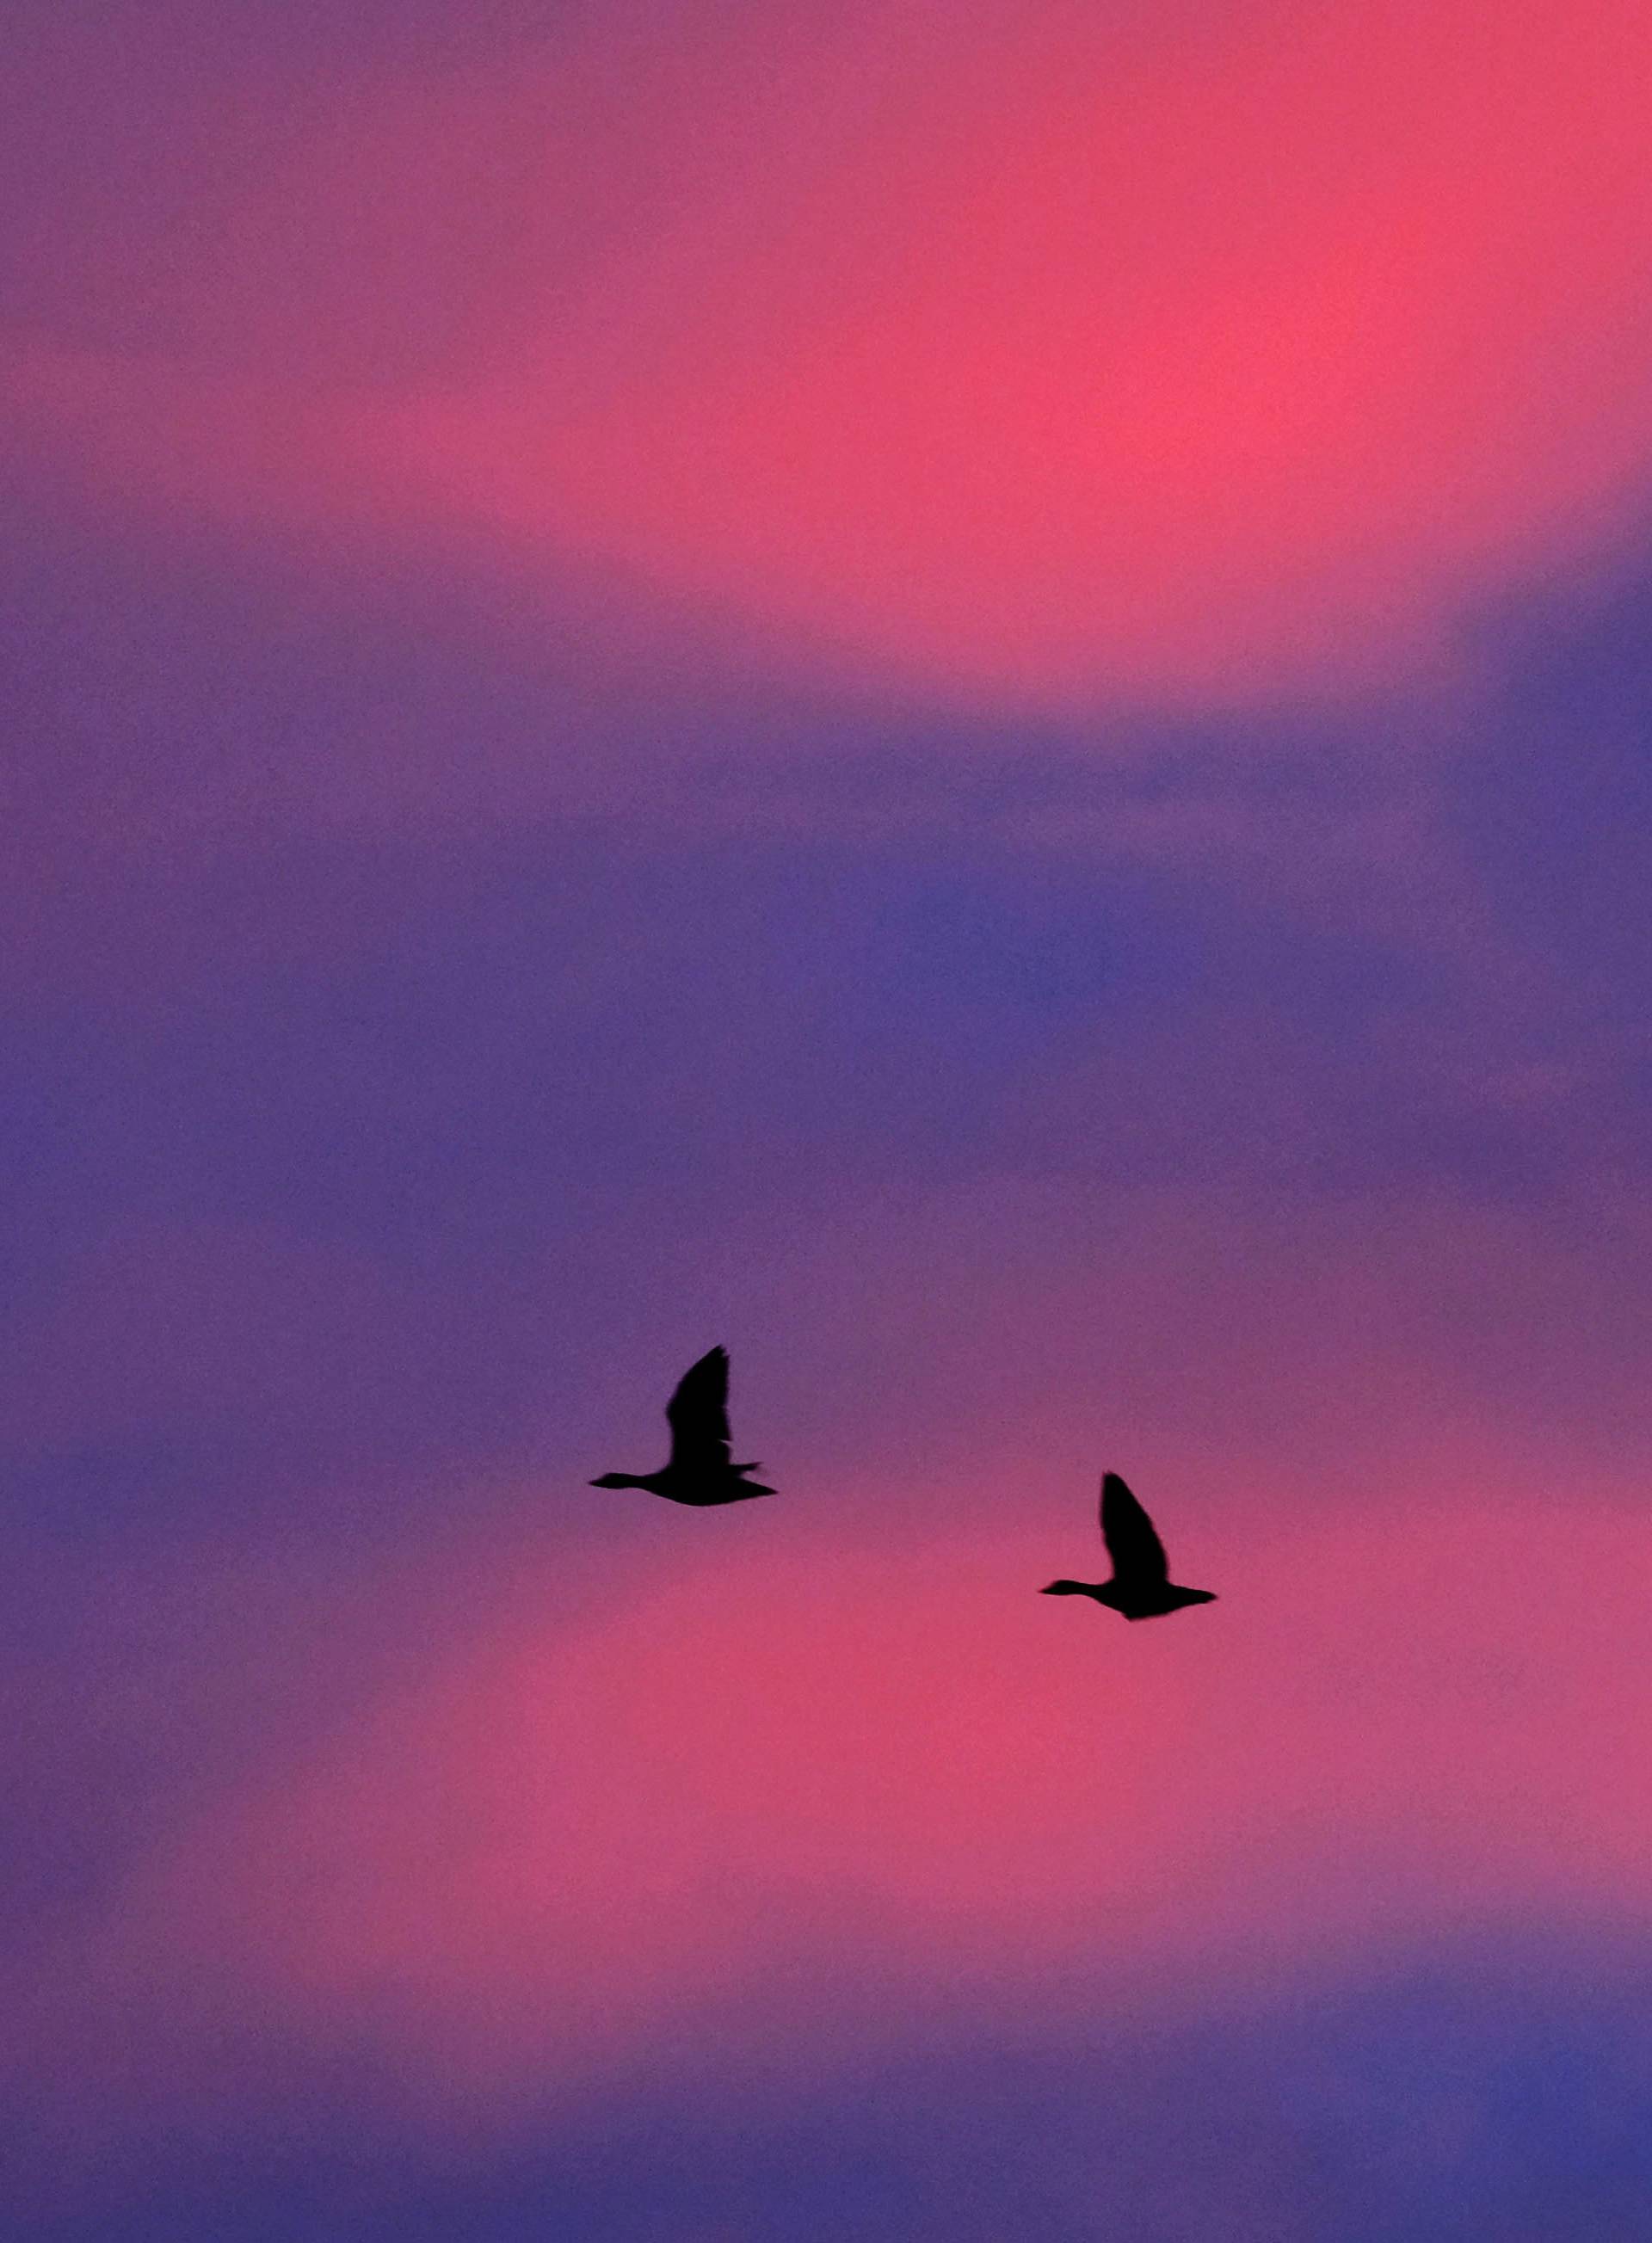 Geese in a red dawn